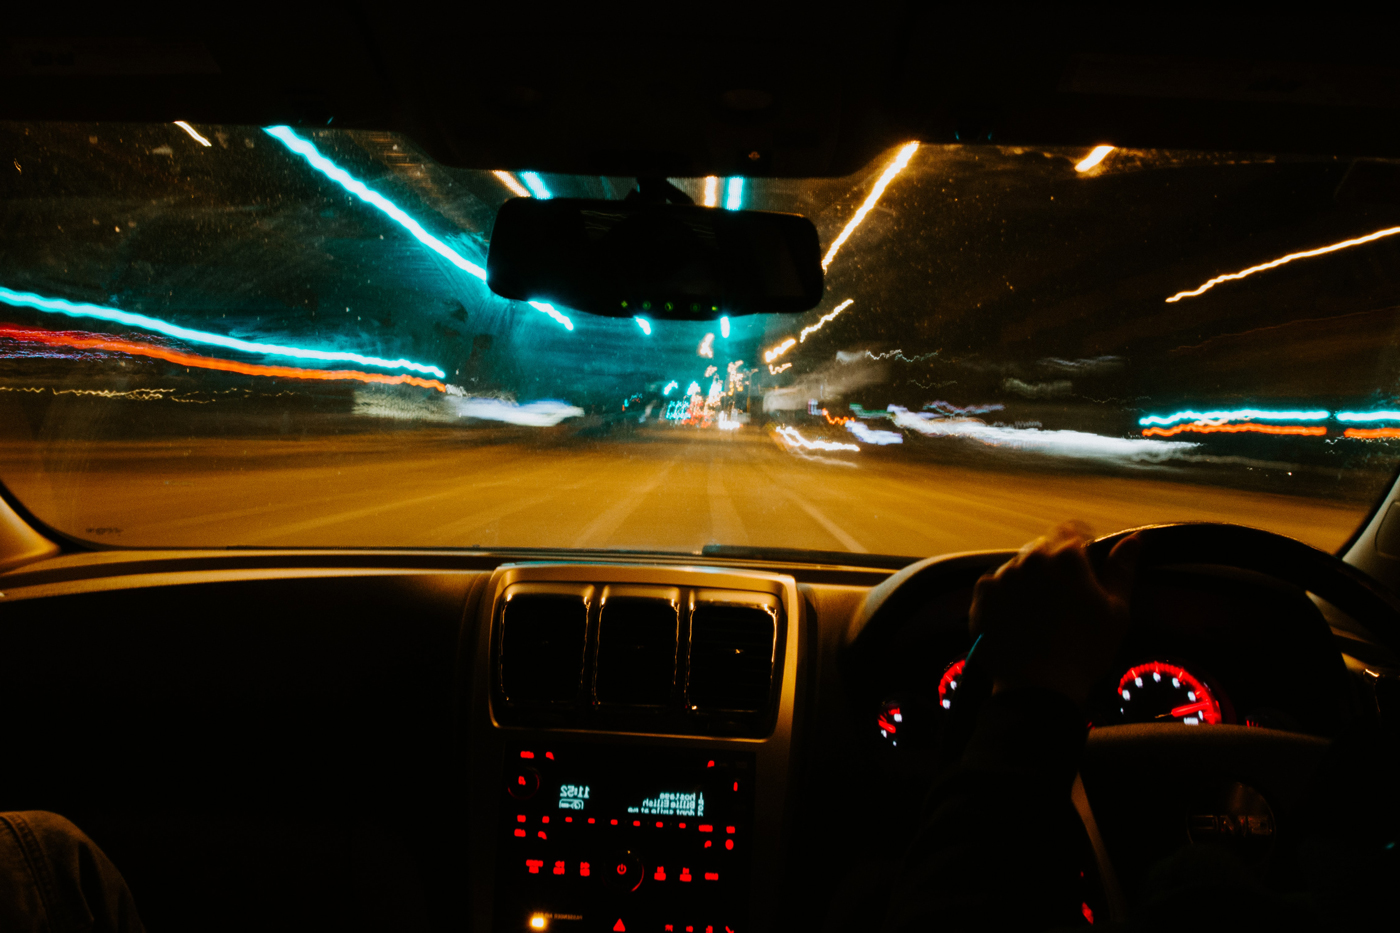 A drivers perspective of driving under the influence with blurred lights at the road side